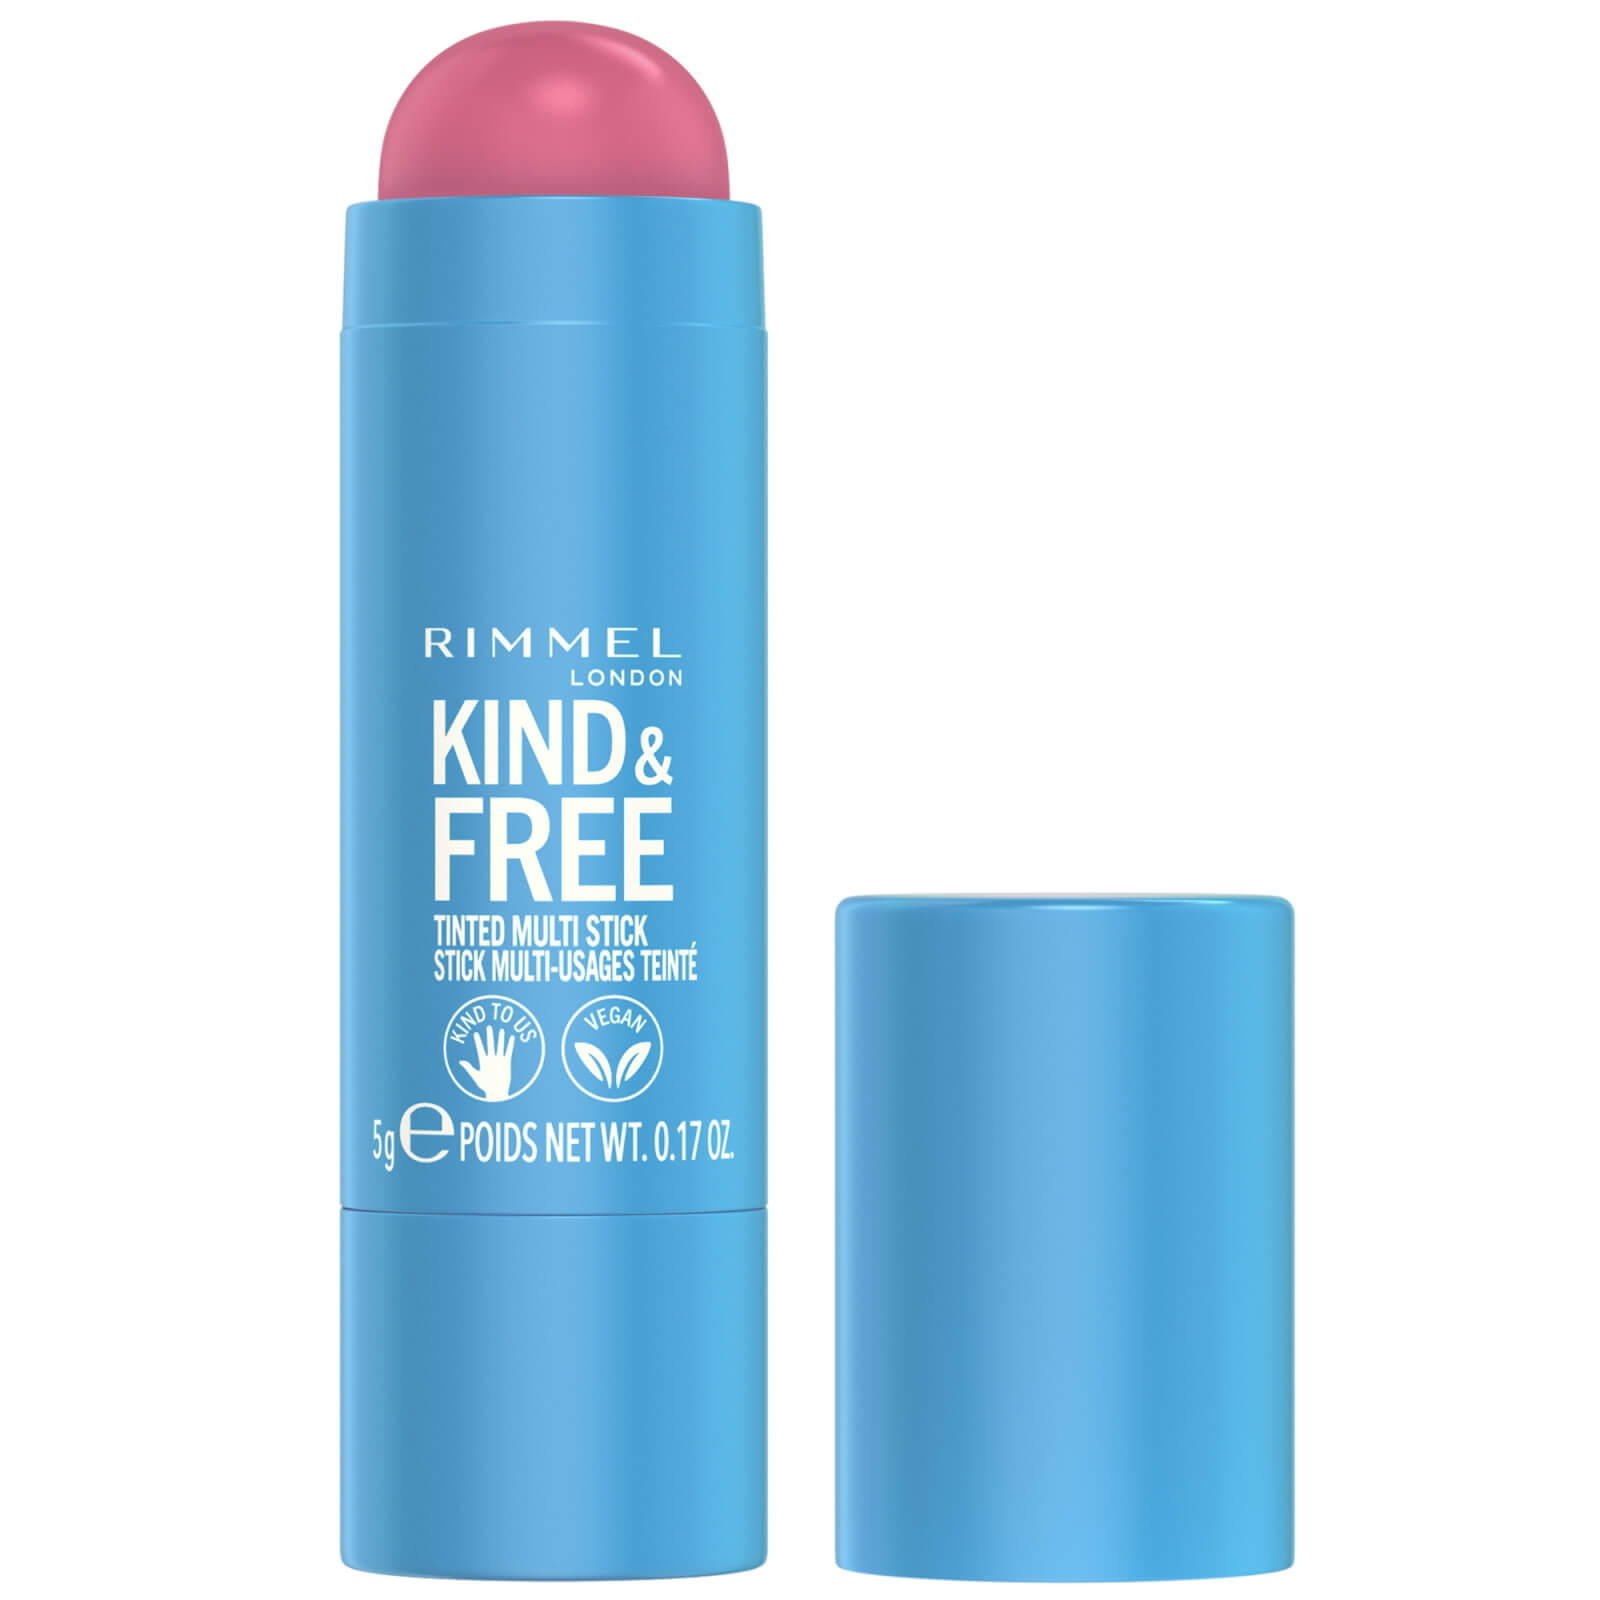 Rimmel Kind And Free Multi-stick 5ml (various Shades) - 003 Pink Heat